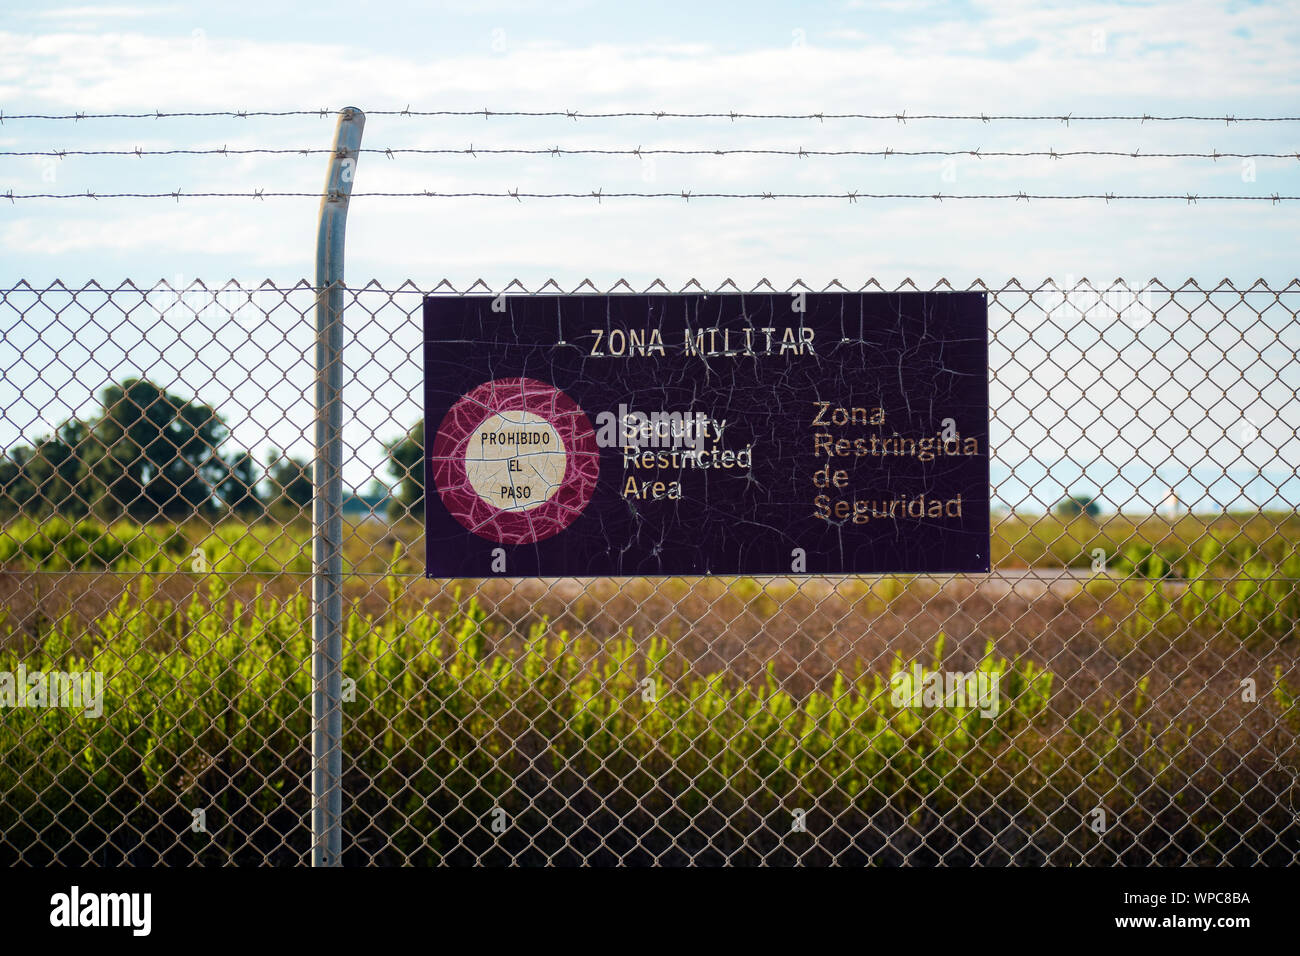 Military zone of restricted access in Spain. Private area. Warning sign to no trespassing. Prohibition in the airport of San Javier, Spain, 2019. Stock Photo